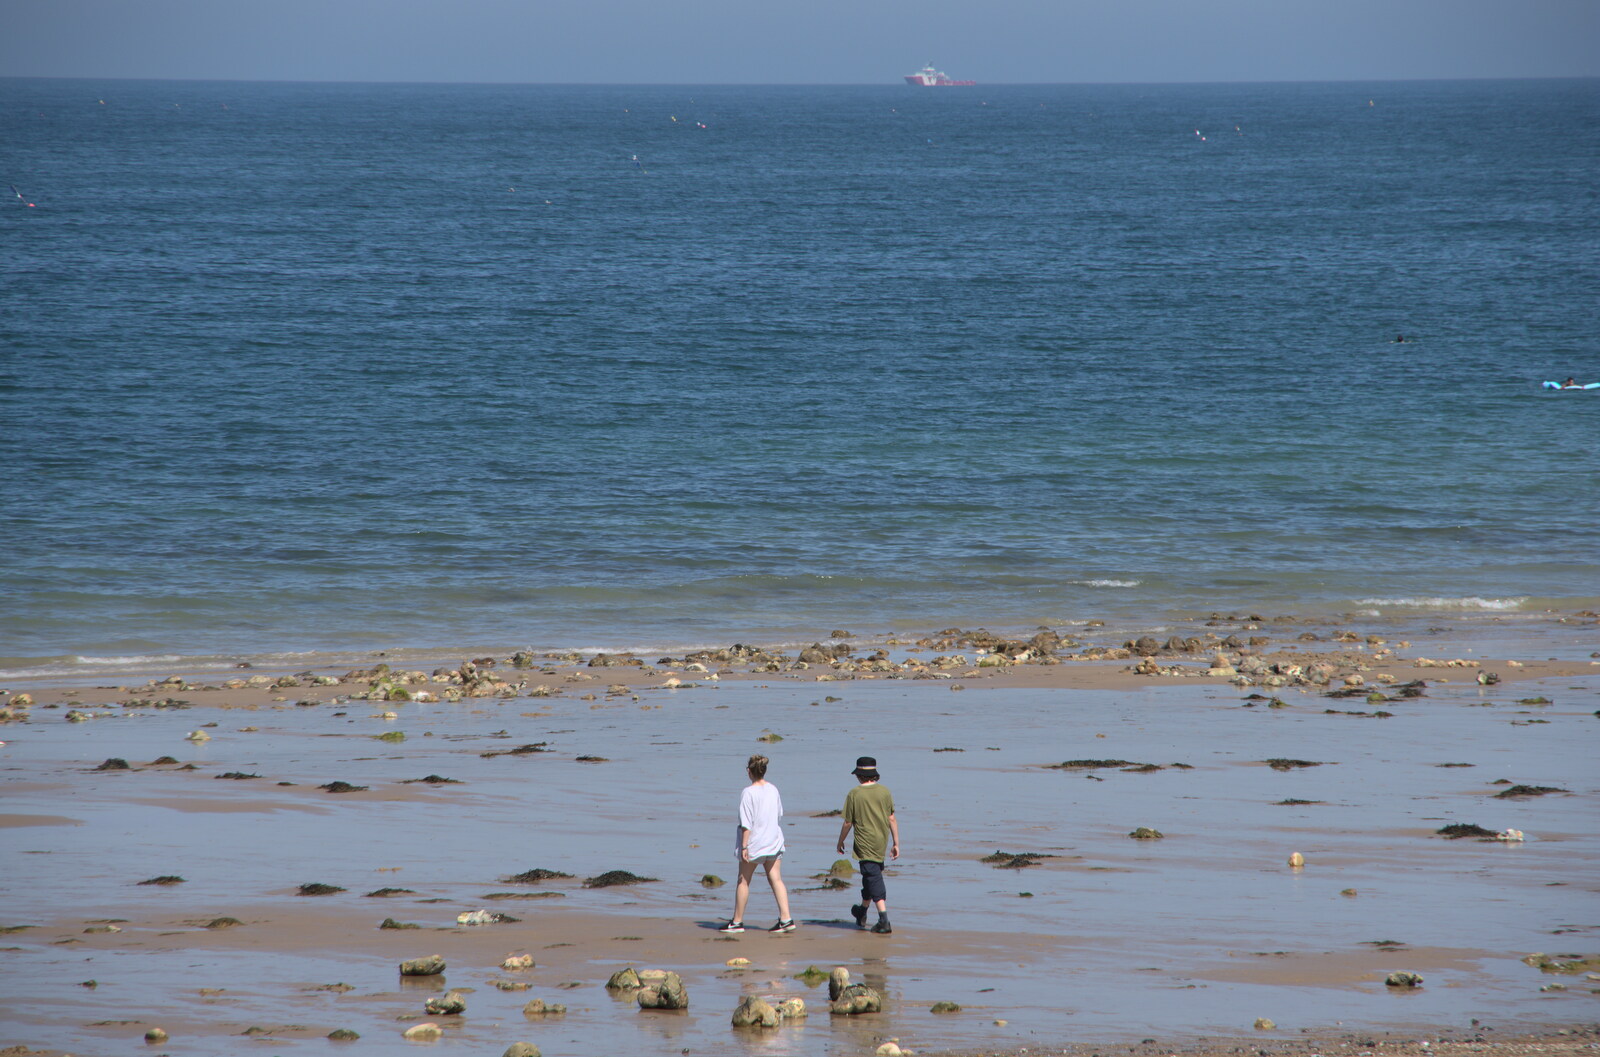 Soph and Fred head out to sea from Camping at Forest Park, Cromer, Norfolk - 12th August 2022